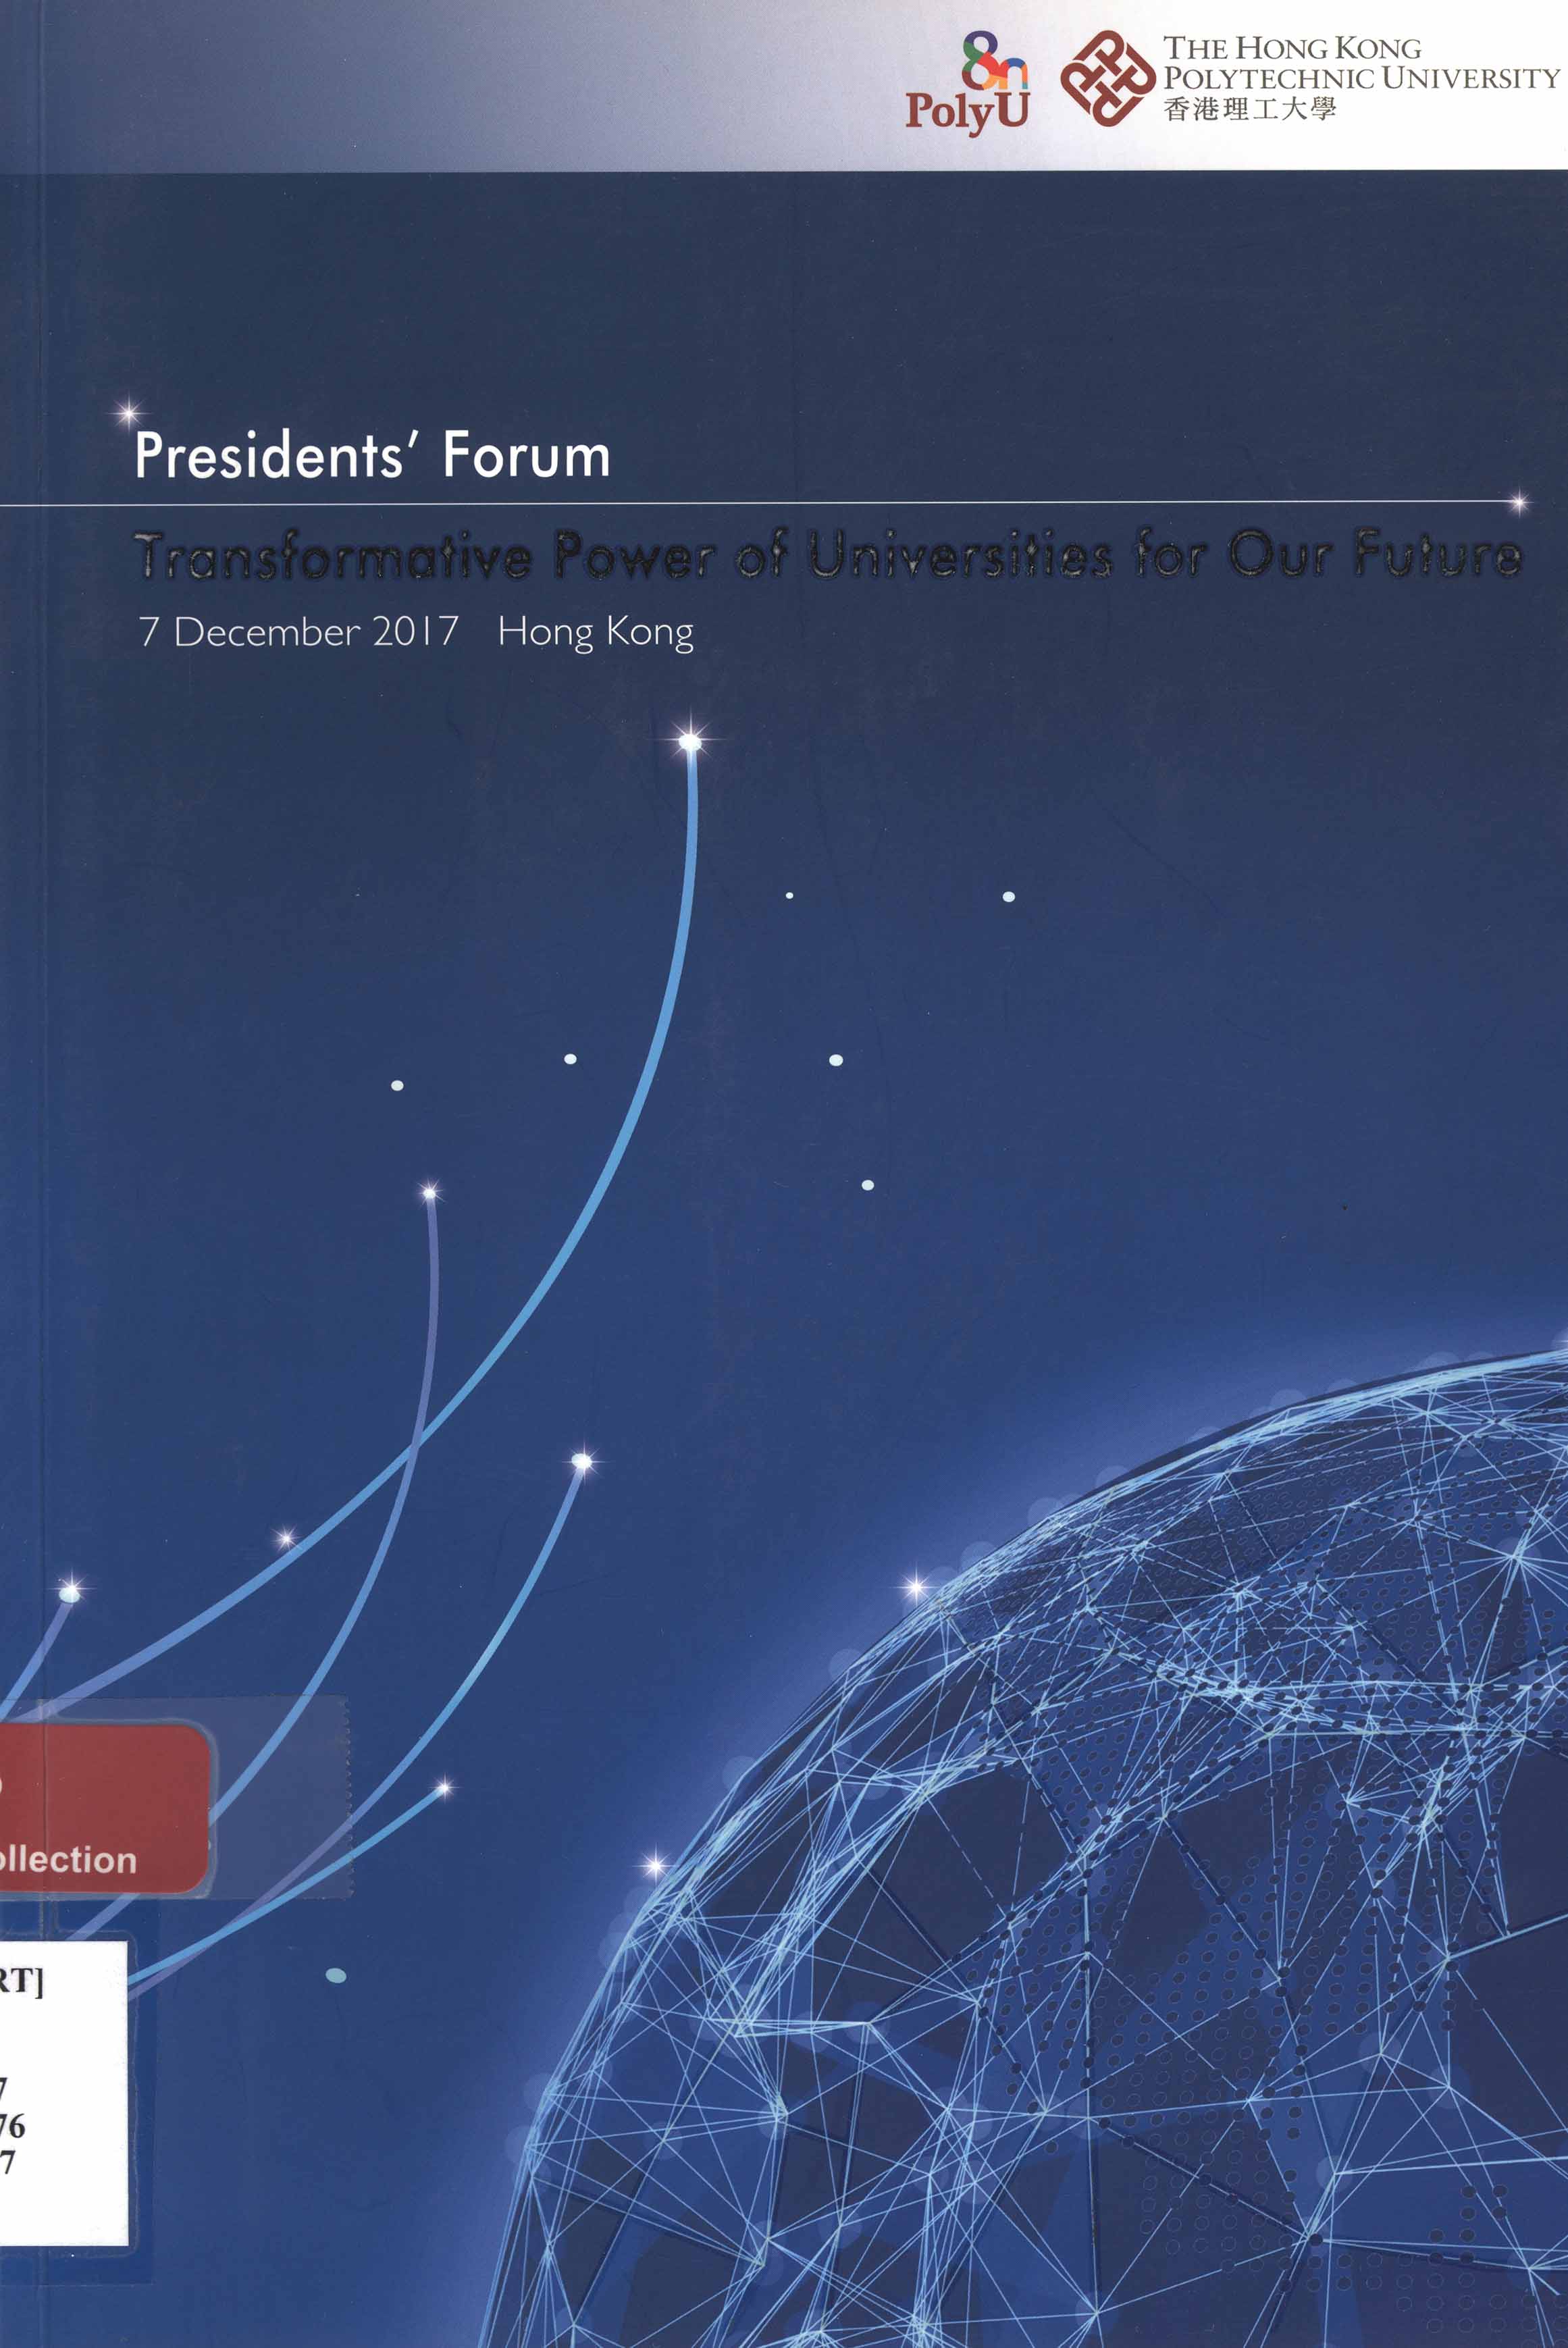 Presidents' Forum : transformative power of universities for our future, 7 December 2017, Hong Kong